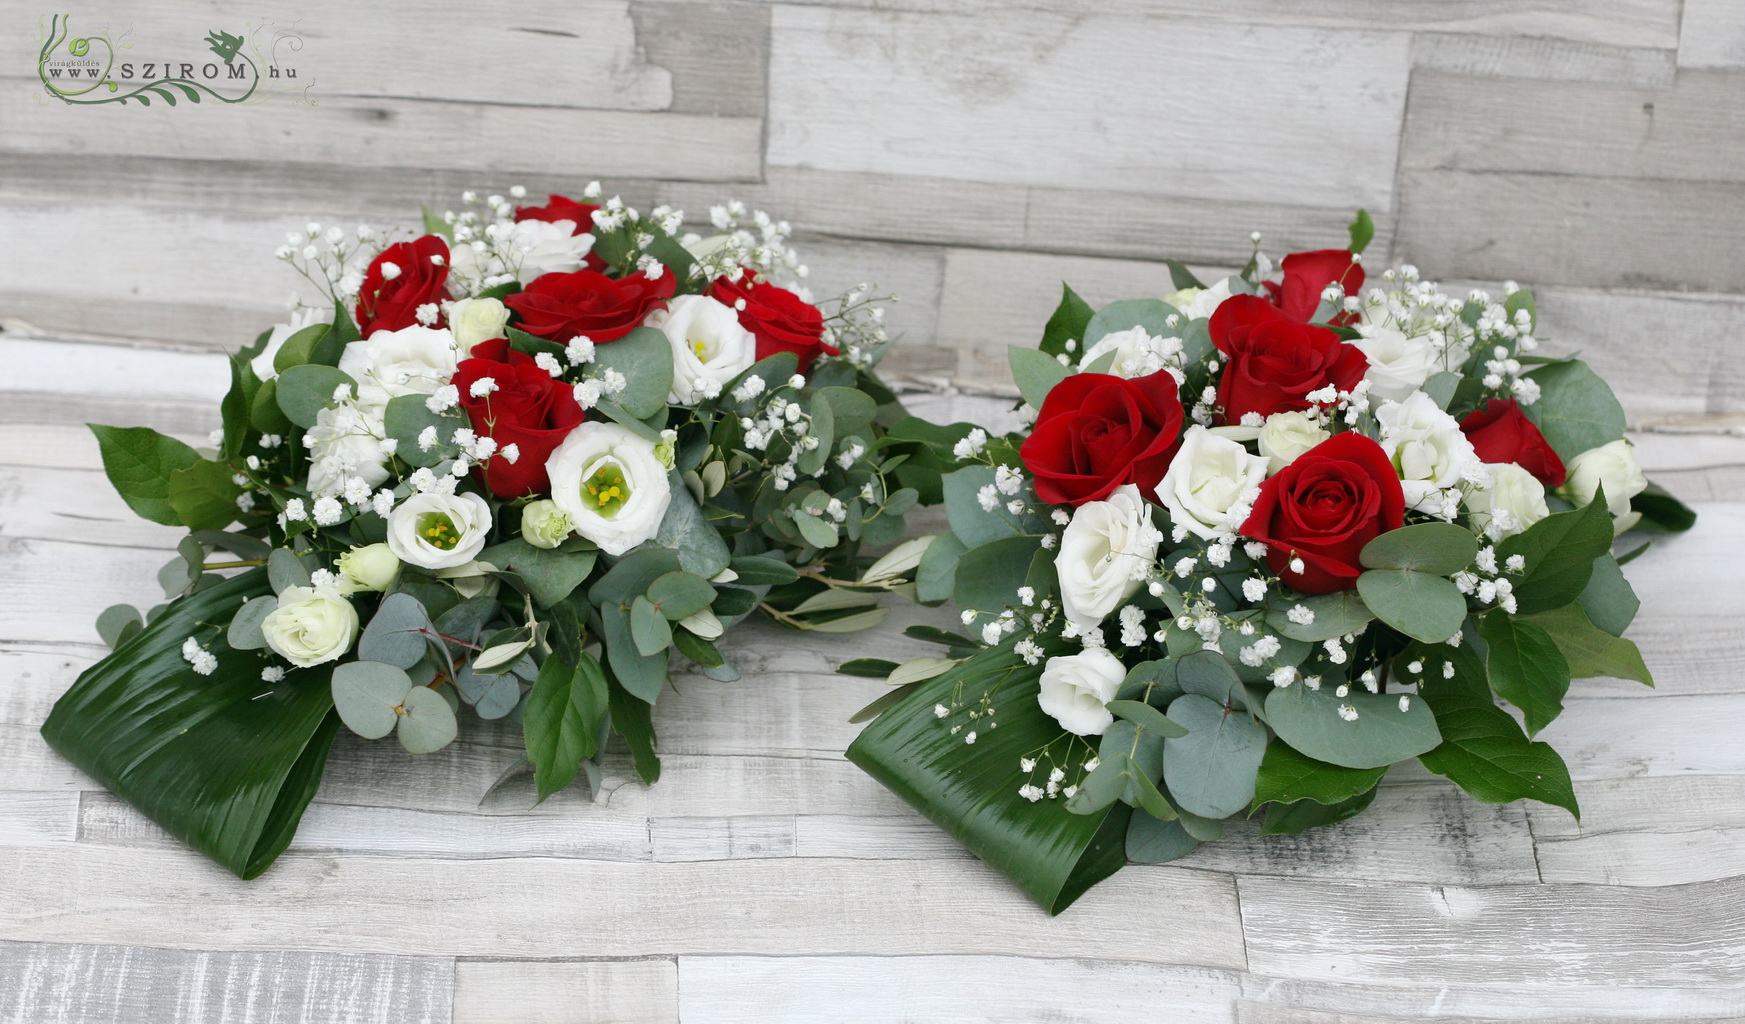 flower delivery Budapest - Centerpiece for long tables 1 pc (red rose, white lisianthus), wedding